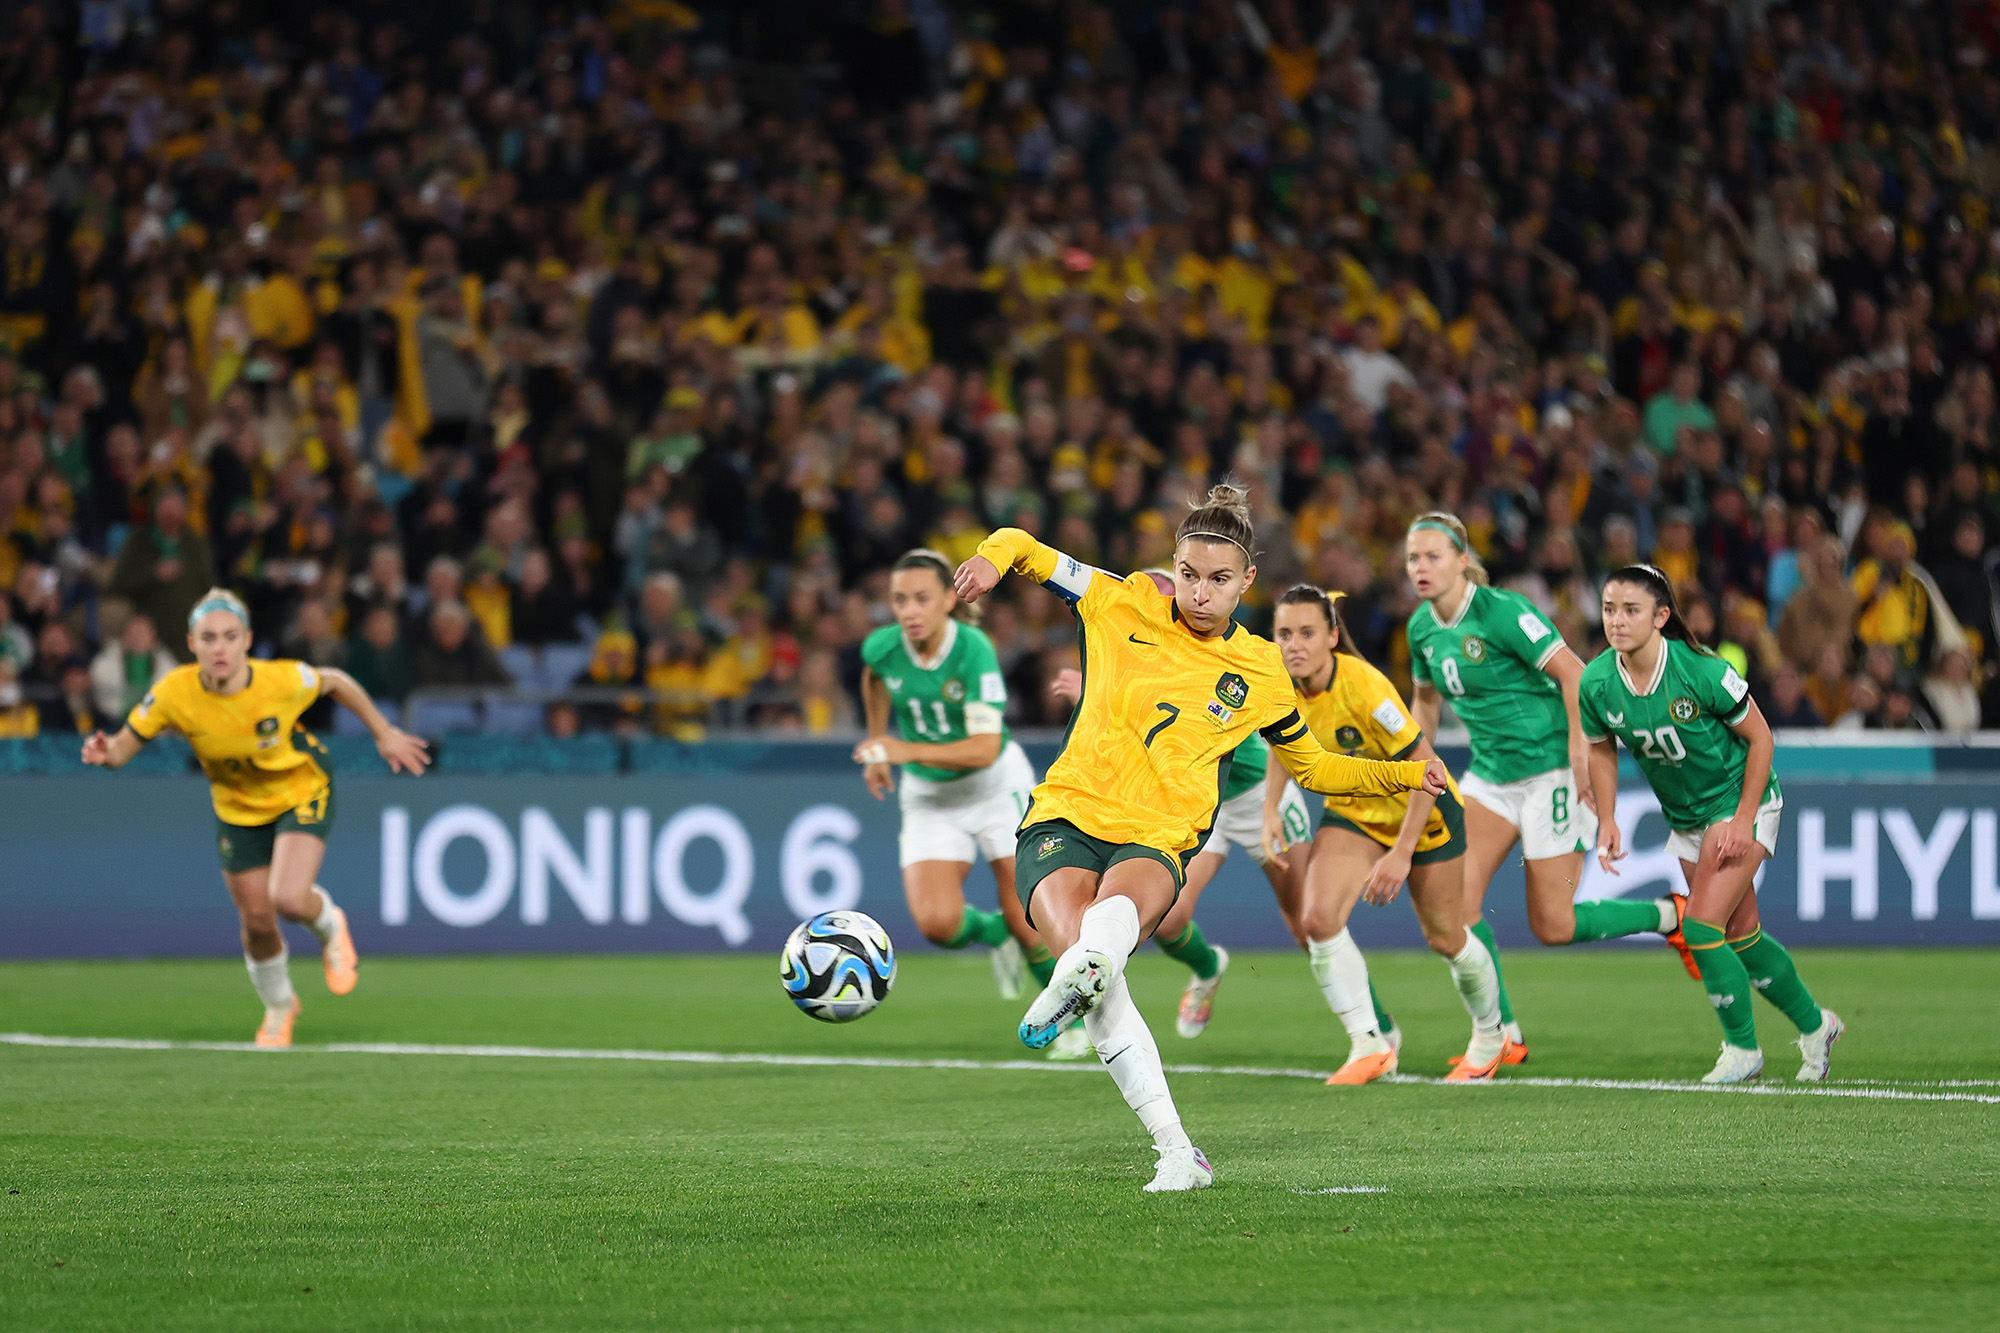 Steph Catley of Australia converts the penalty to score the team's first goal during the FIFA Women's World Cup Australia & New Zealand 2023 Group B match between Australia and Ireland at Stadium Australia on July 20.